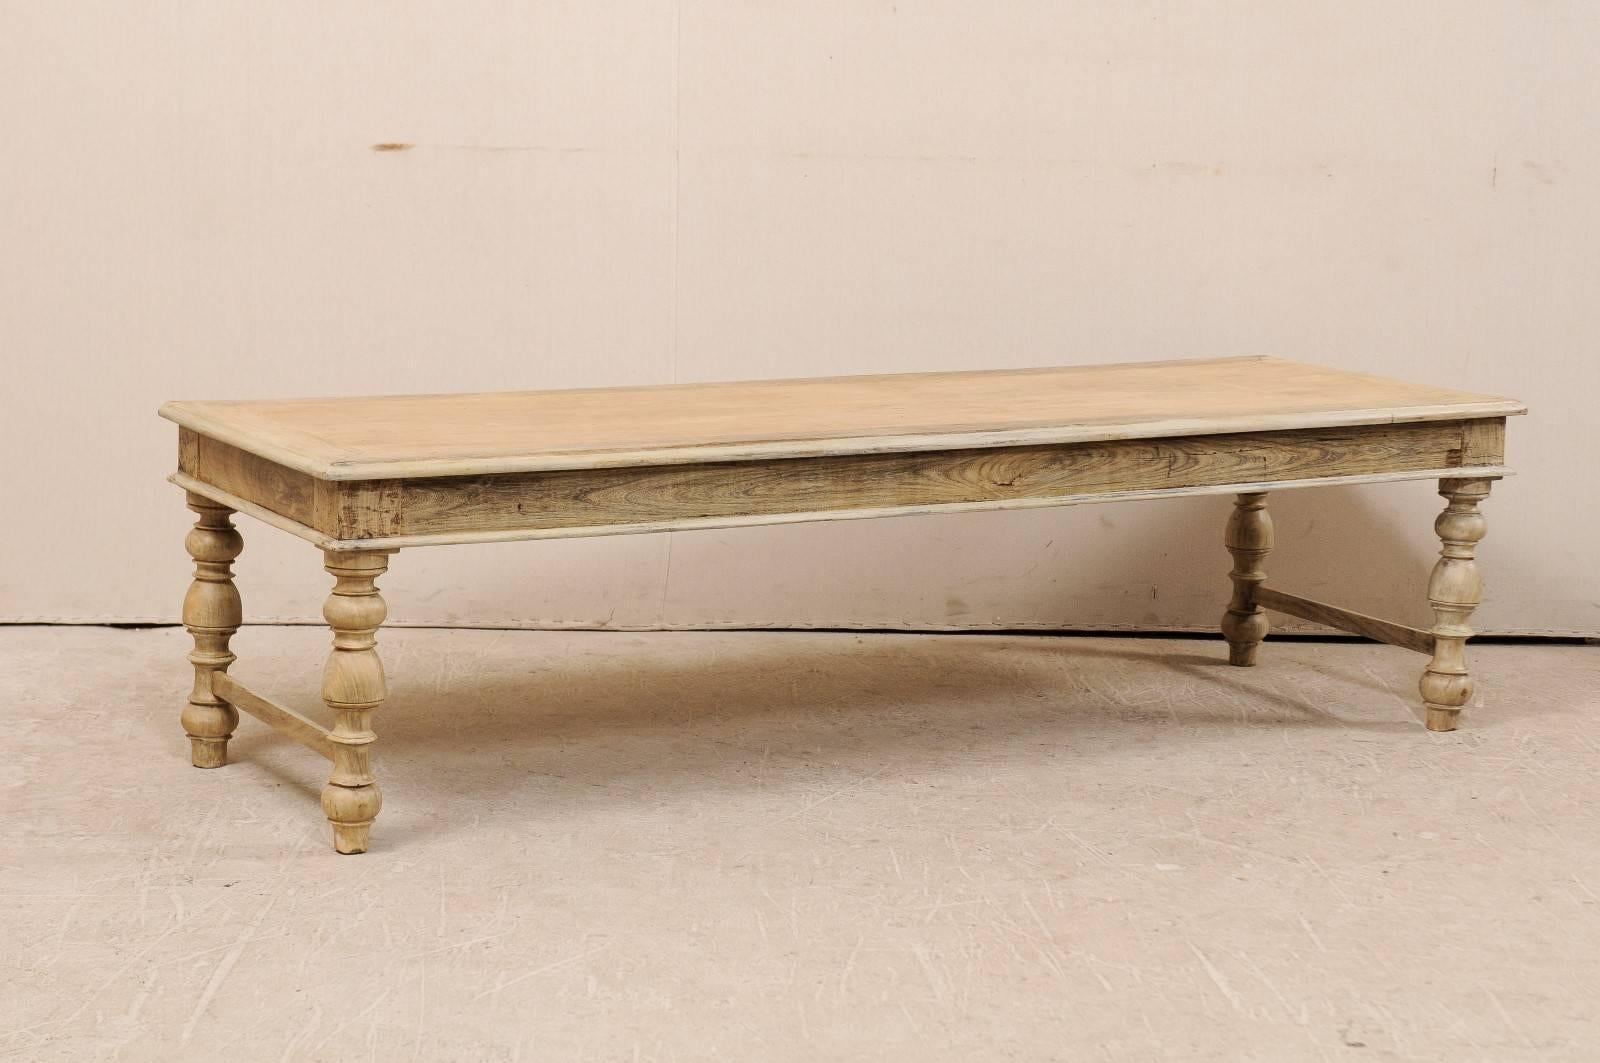 A Belgian mid-20th century wood coffee / centre table. This Belgian coffee table of wood features a long, rectangular top and nicely turned legs. The skirt has nice, clean lines which mimic the top of this table. The legs are connected by a